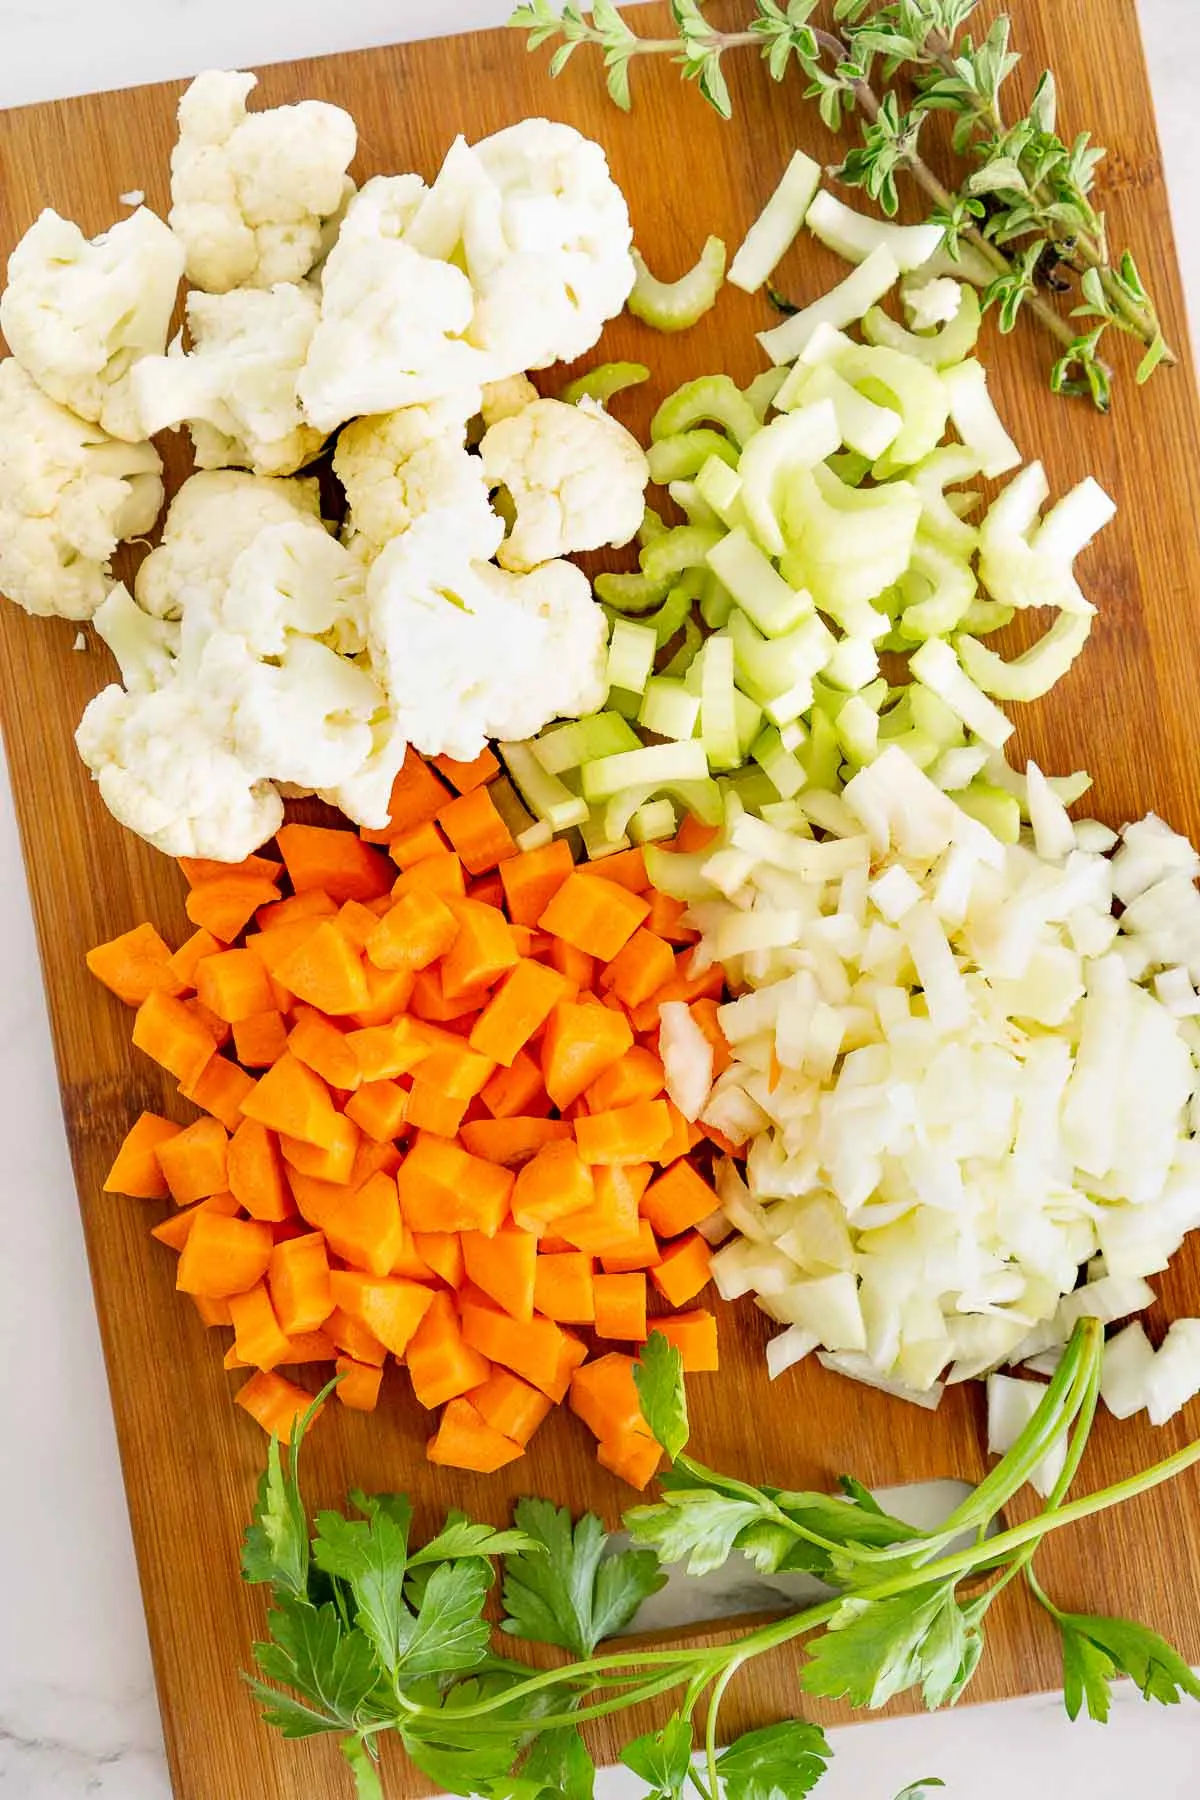 Chopped carrots, celery, onion, and cauliflower on a cutting board.